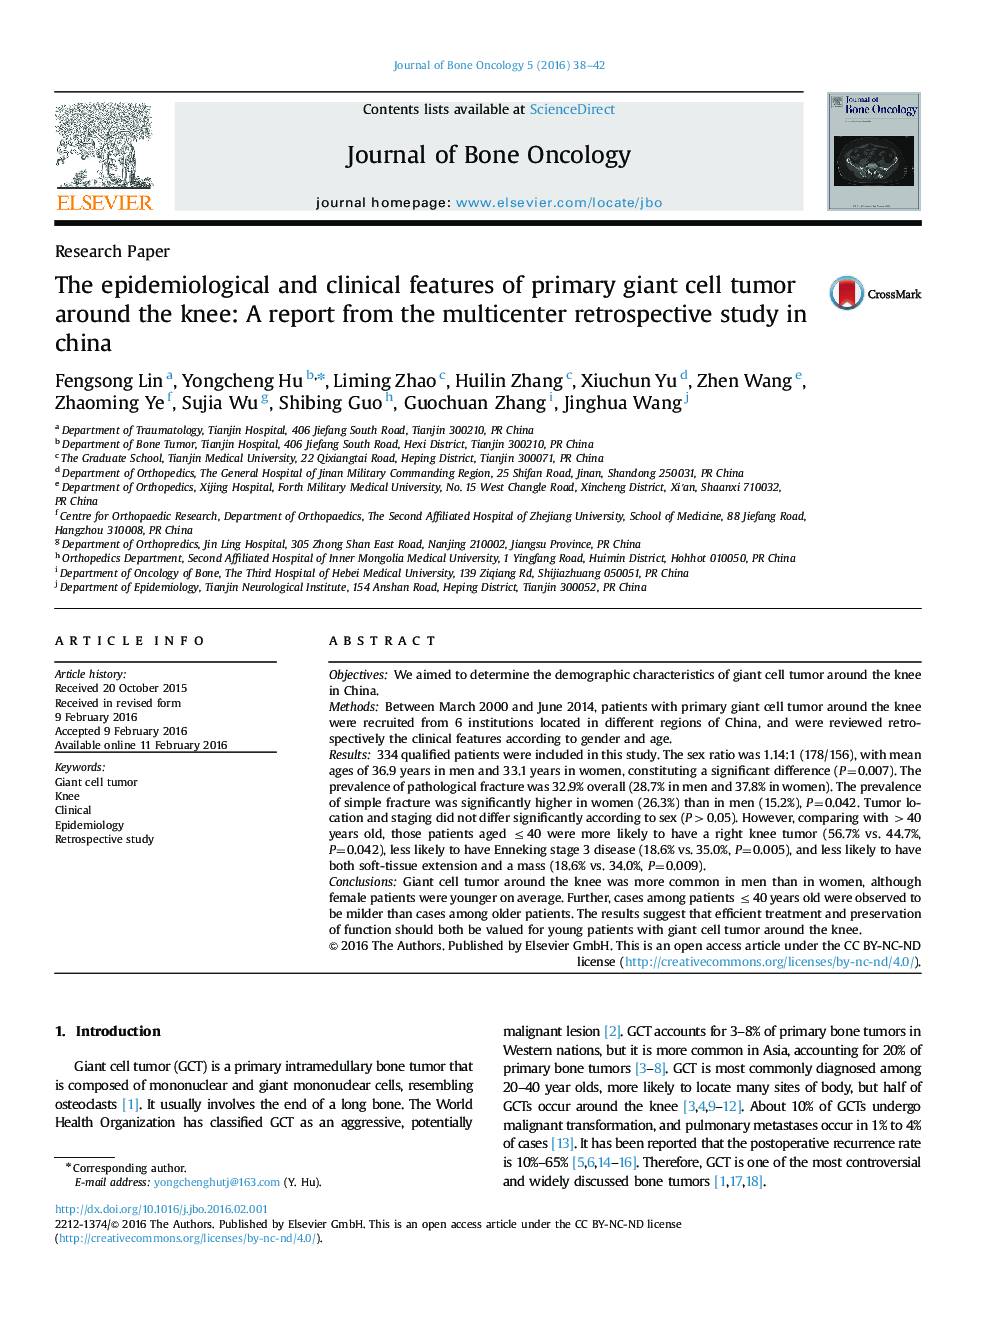 The epidemiological and clinical features of primary giant cell tumor around the knee: A report from the multicenter retrospective study in china